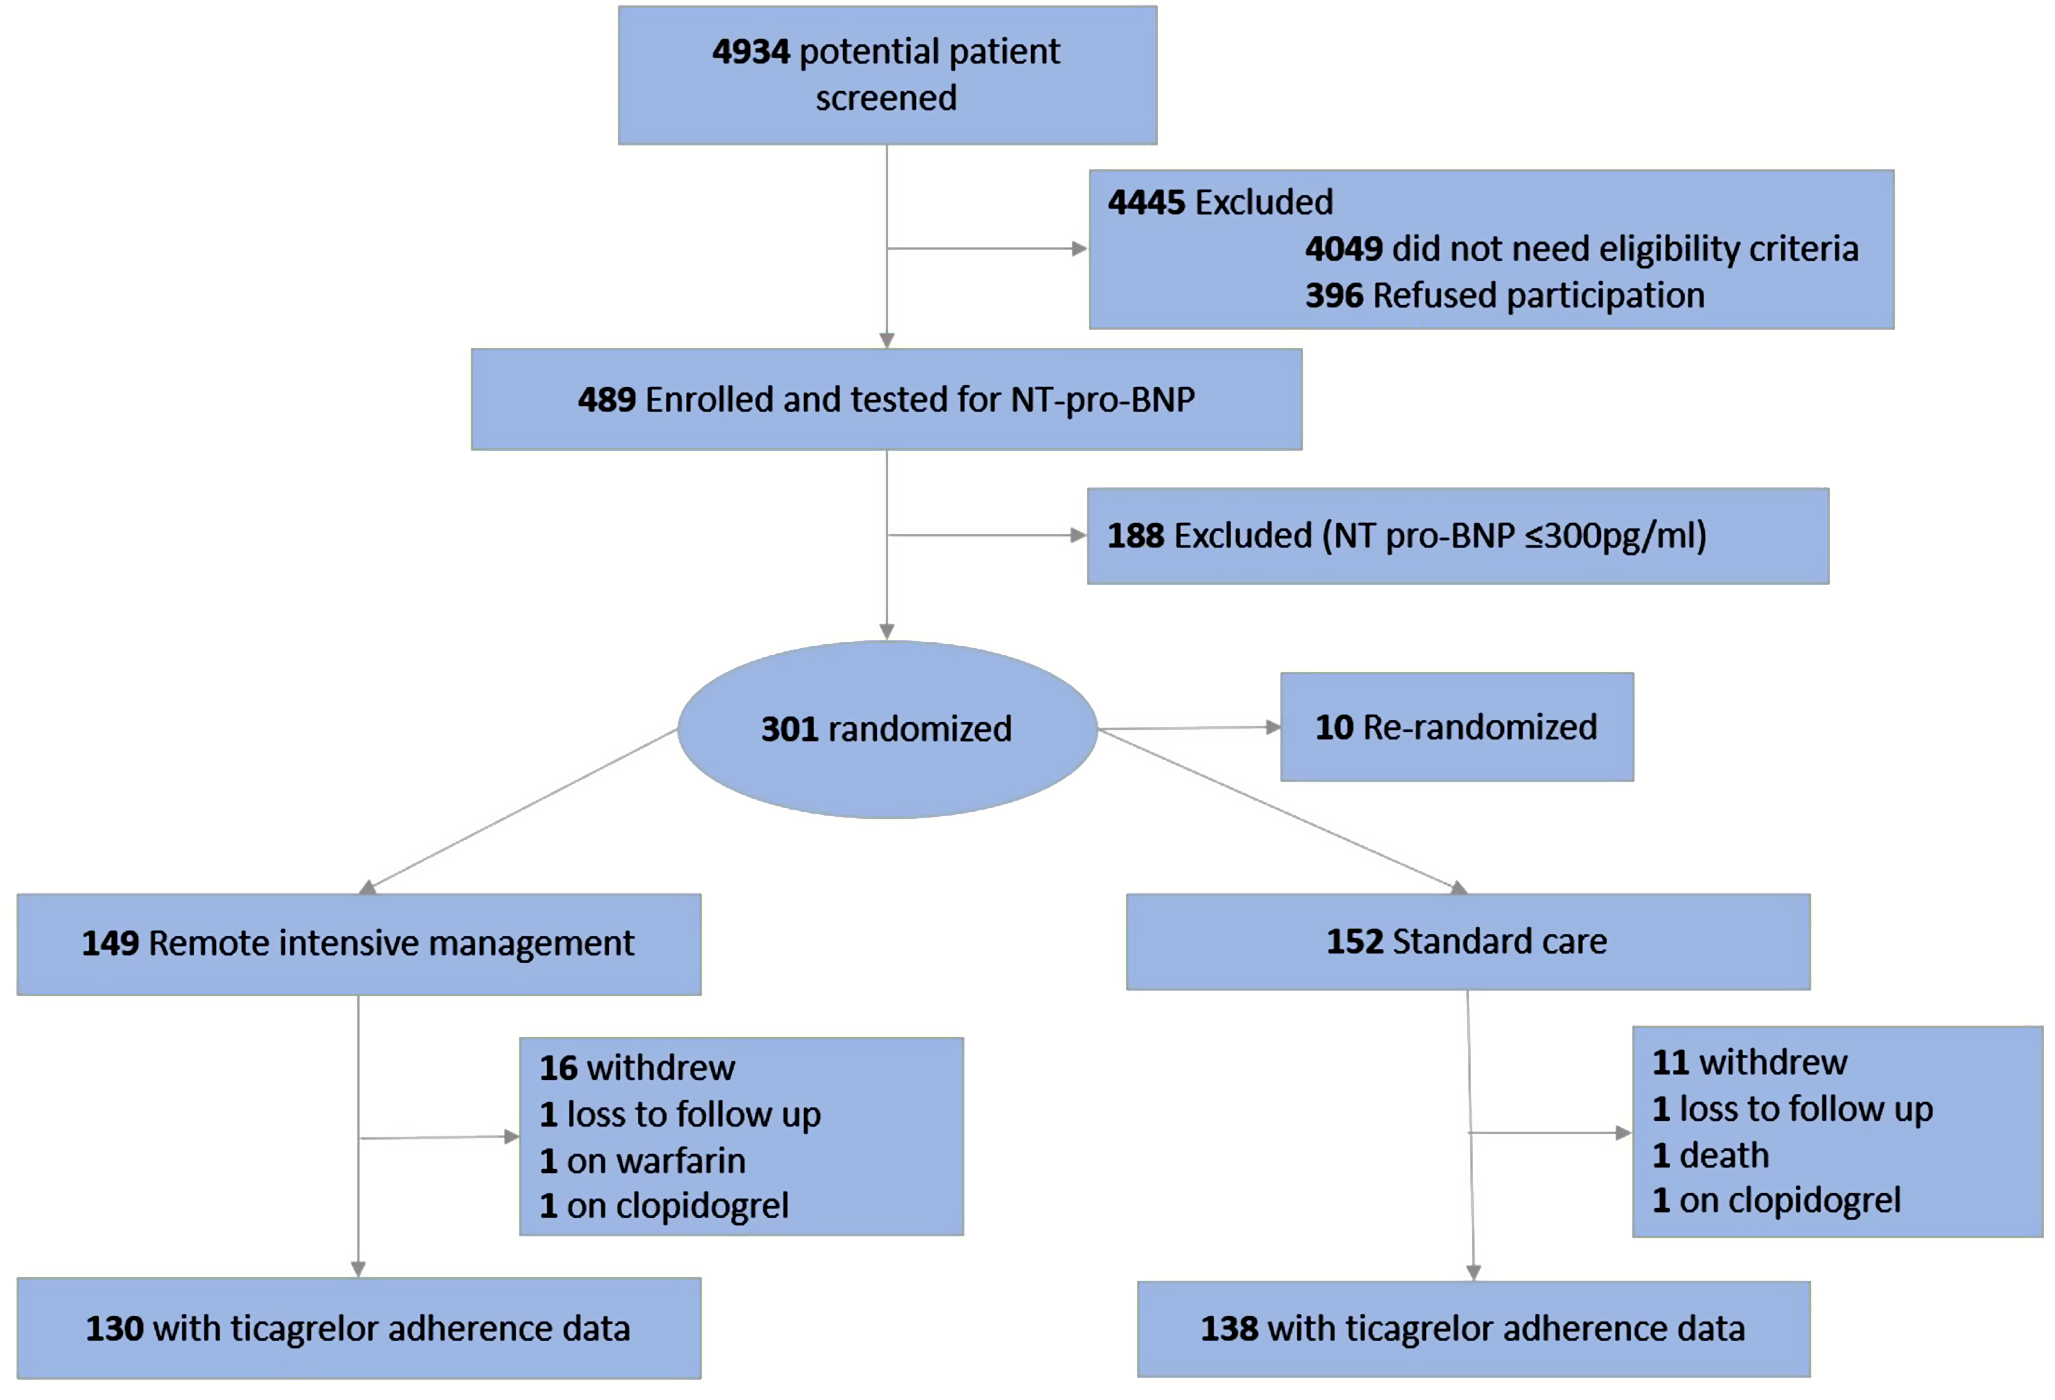 Remote intensive management to improve antiplatelet adherence in acute myocardial infarction: a secondary analysis of the randomized controlled IMMACULATE trial